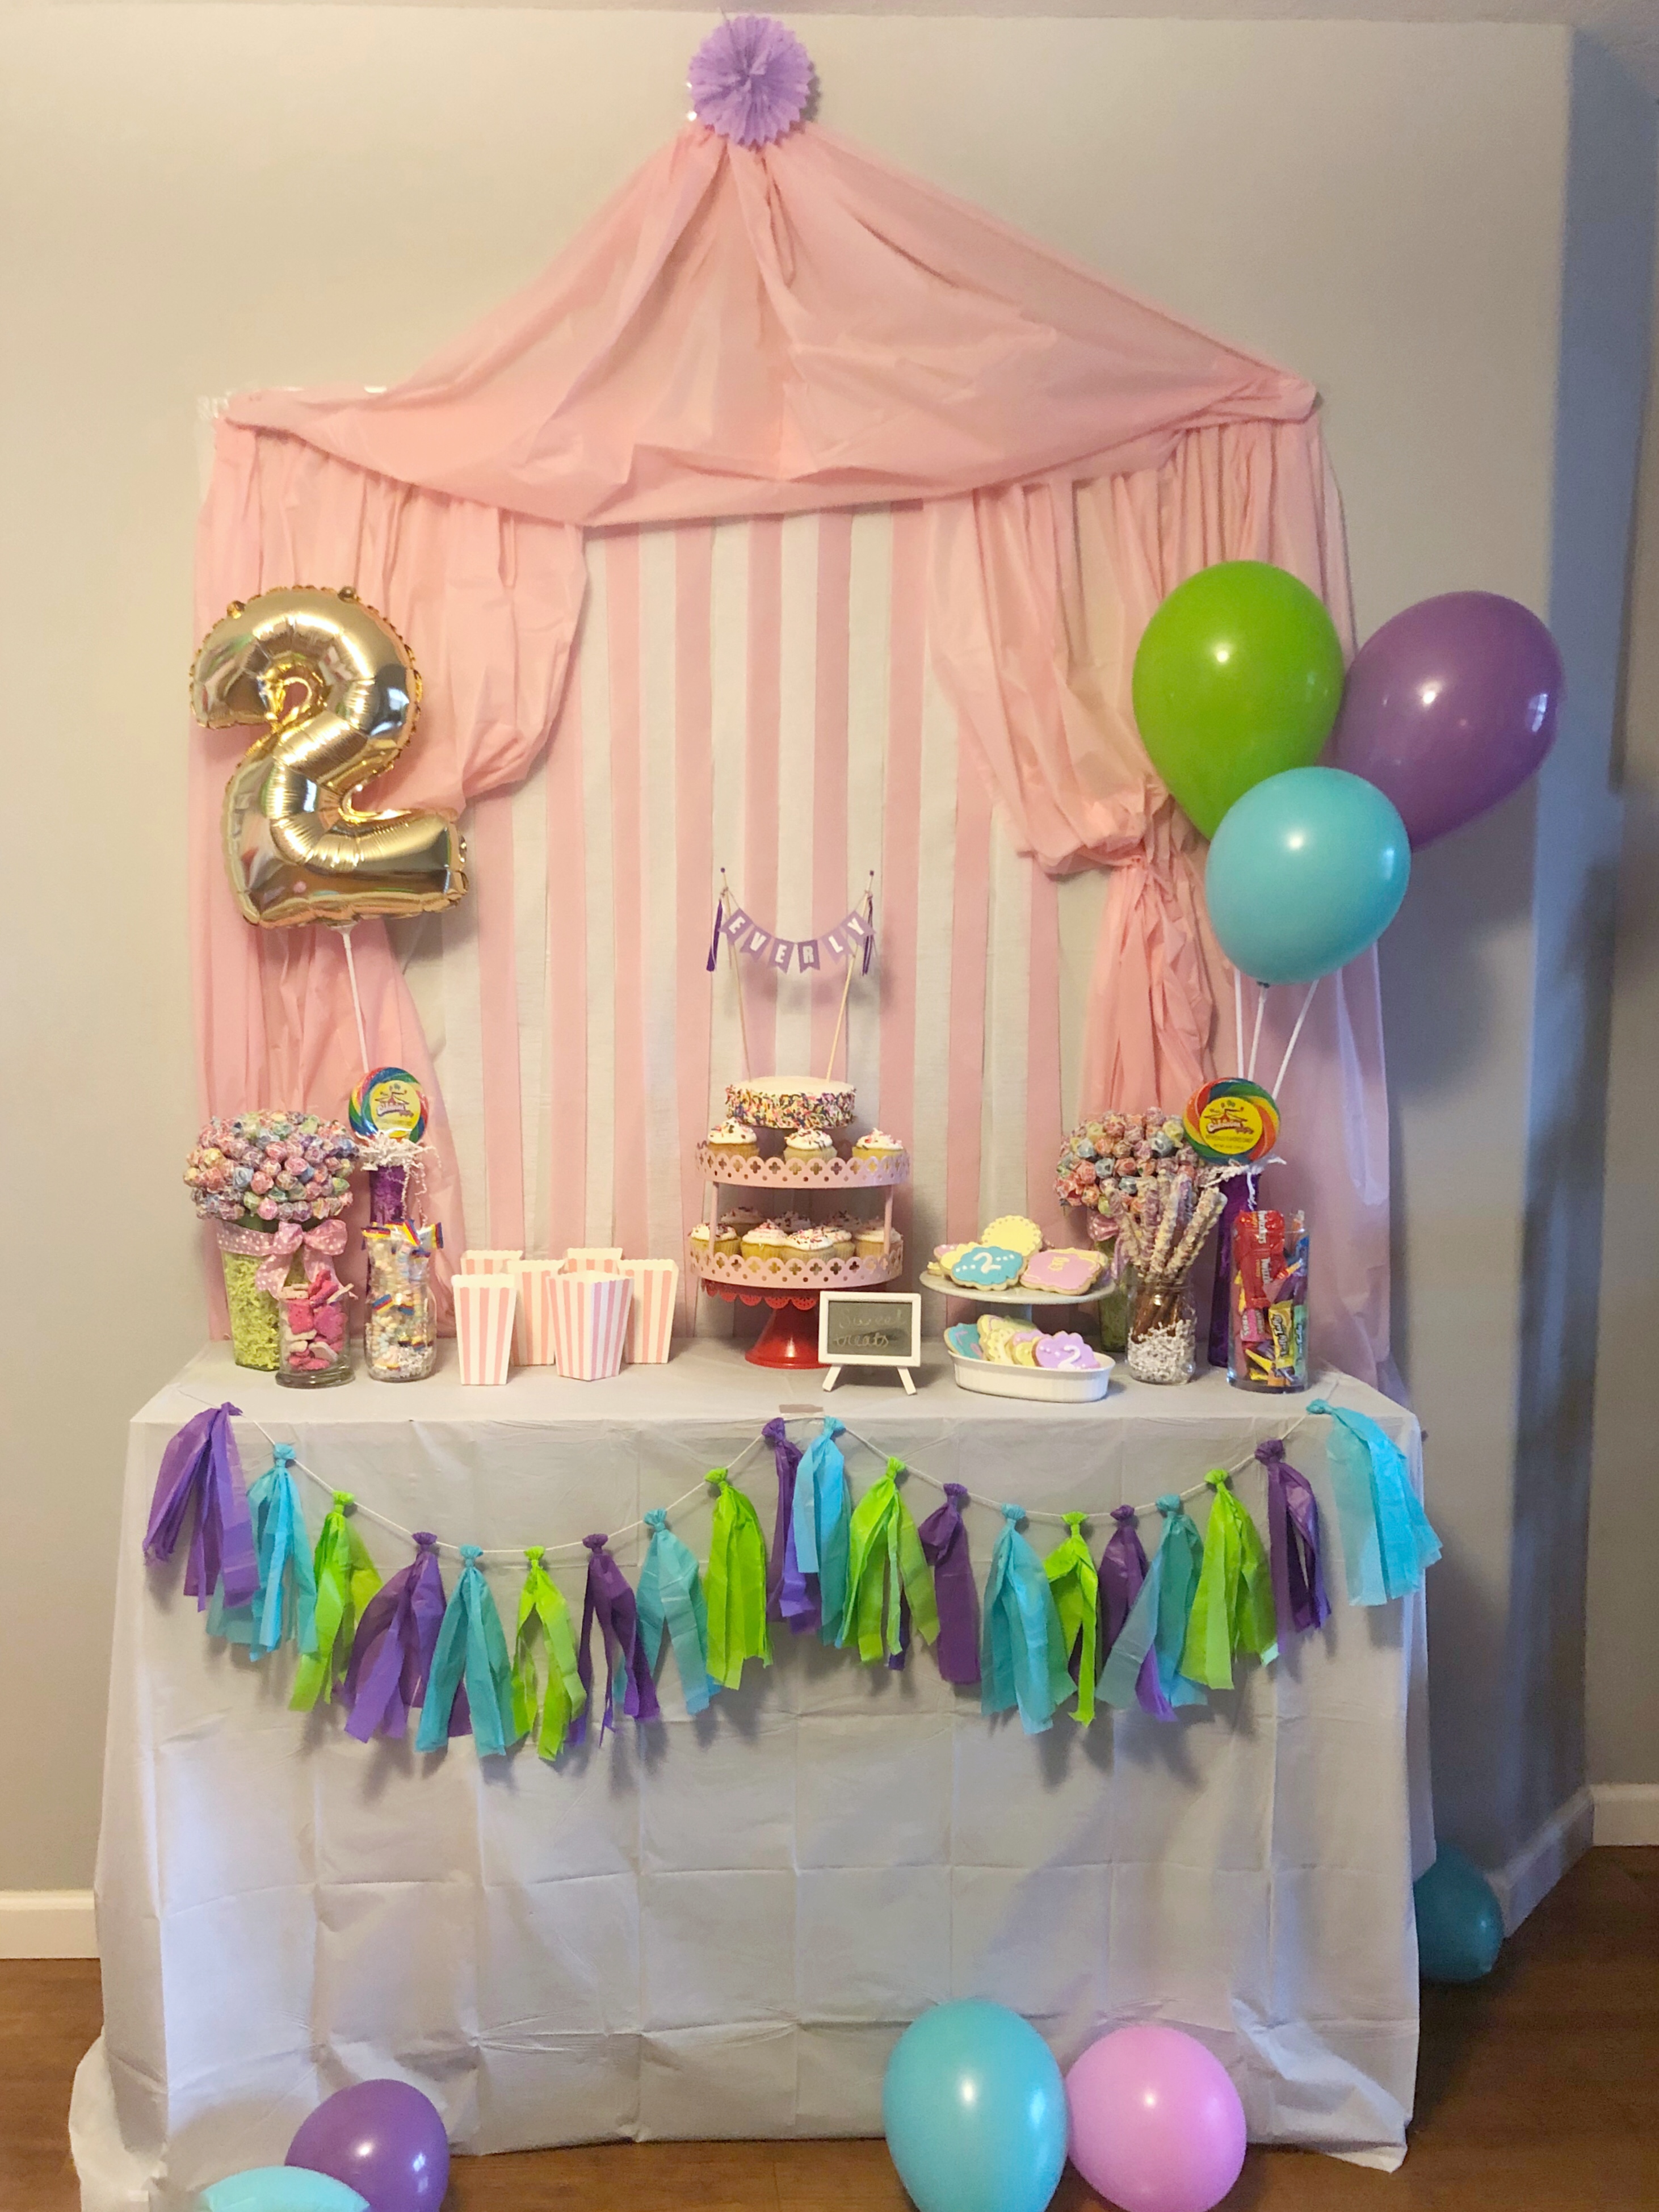 Carnival birthday party cake table